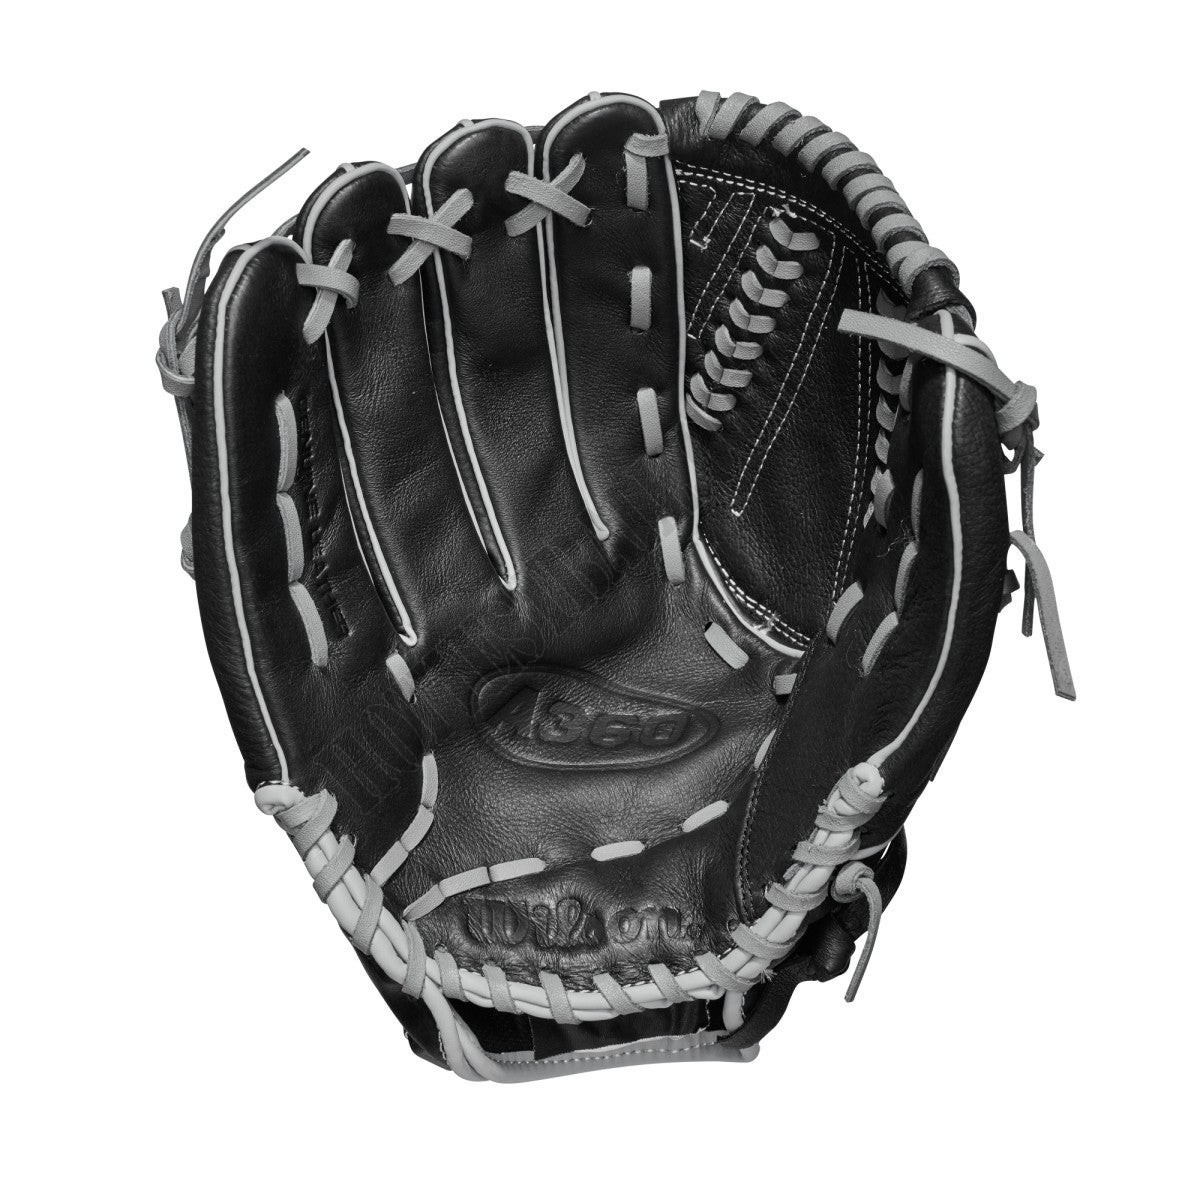 A360 13" Slowpitch Glove - Left Hand Throw ● Wilson Promotions - -2